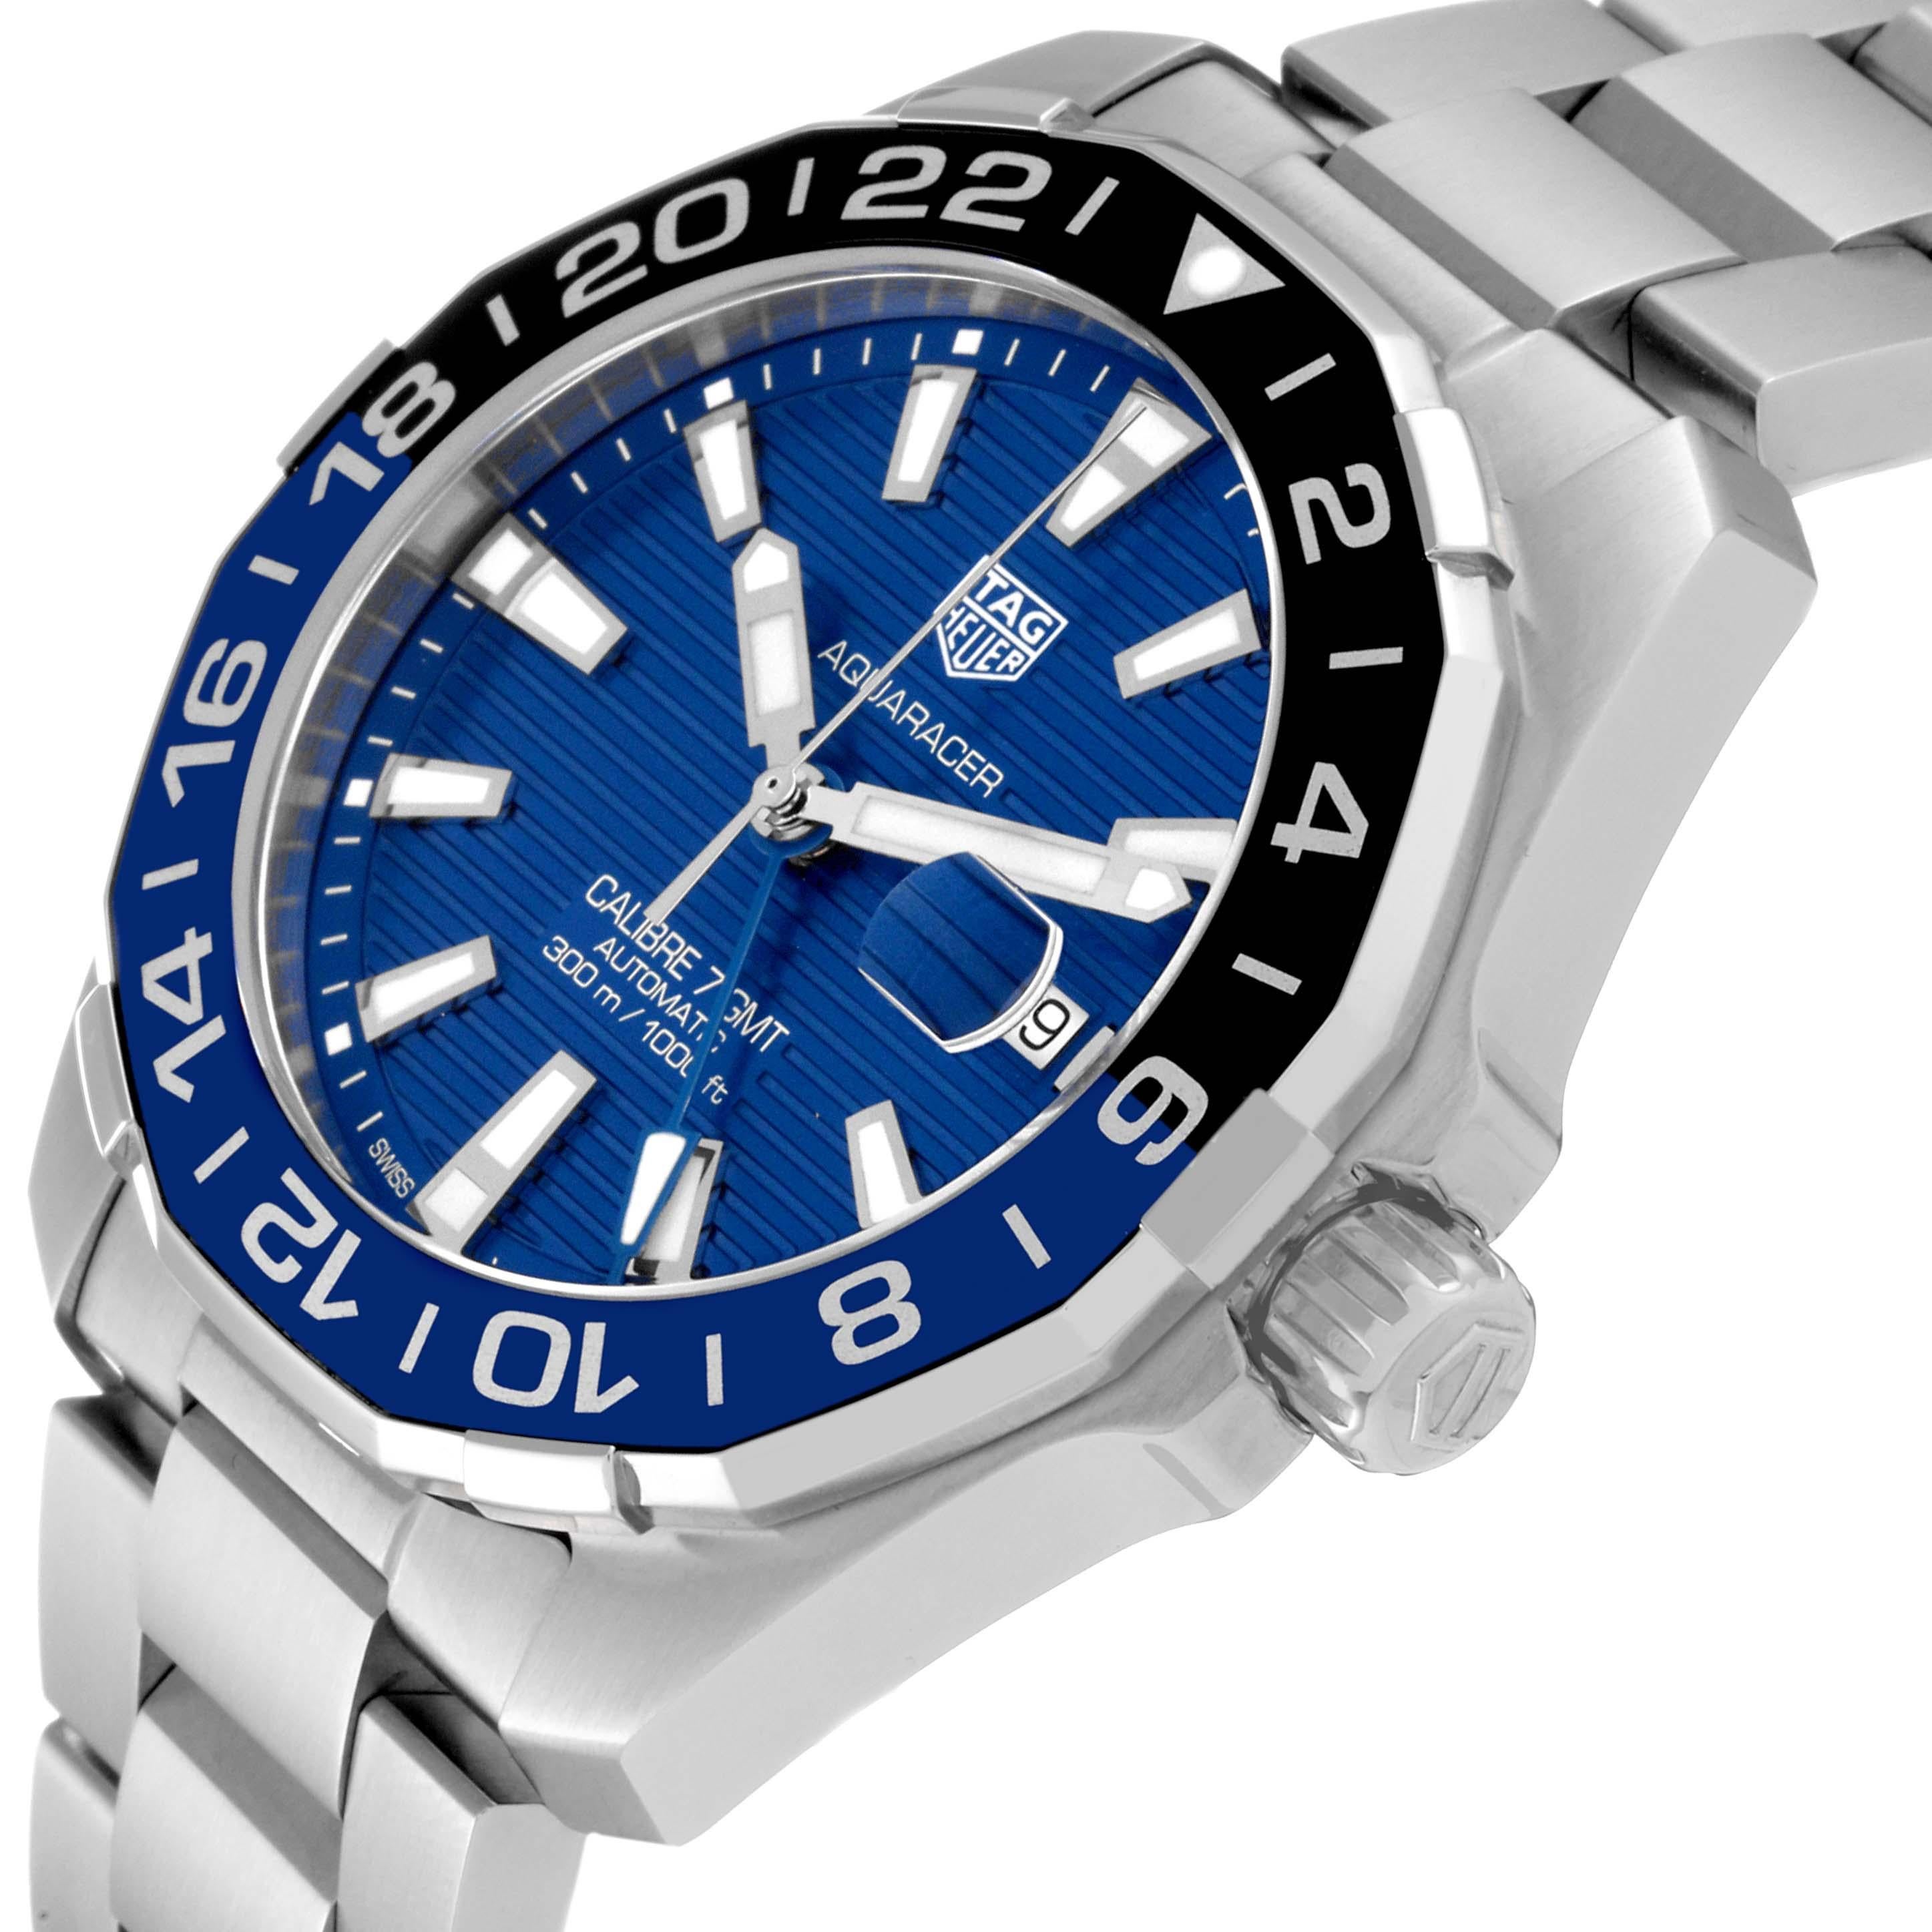 Tag Heuer Aquaracer Blue Dial Steel Mens Watch WAY201T For Sale 1